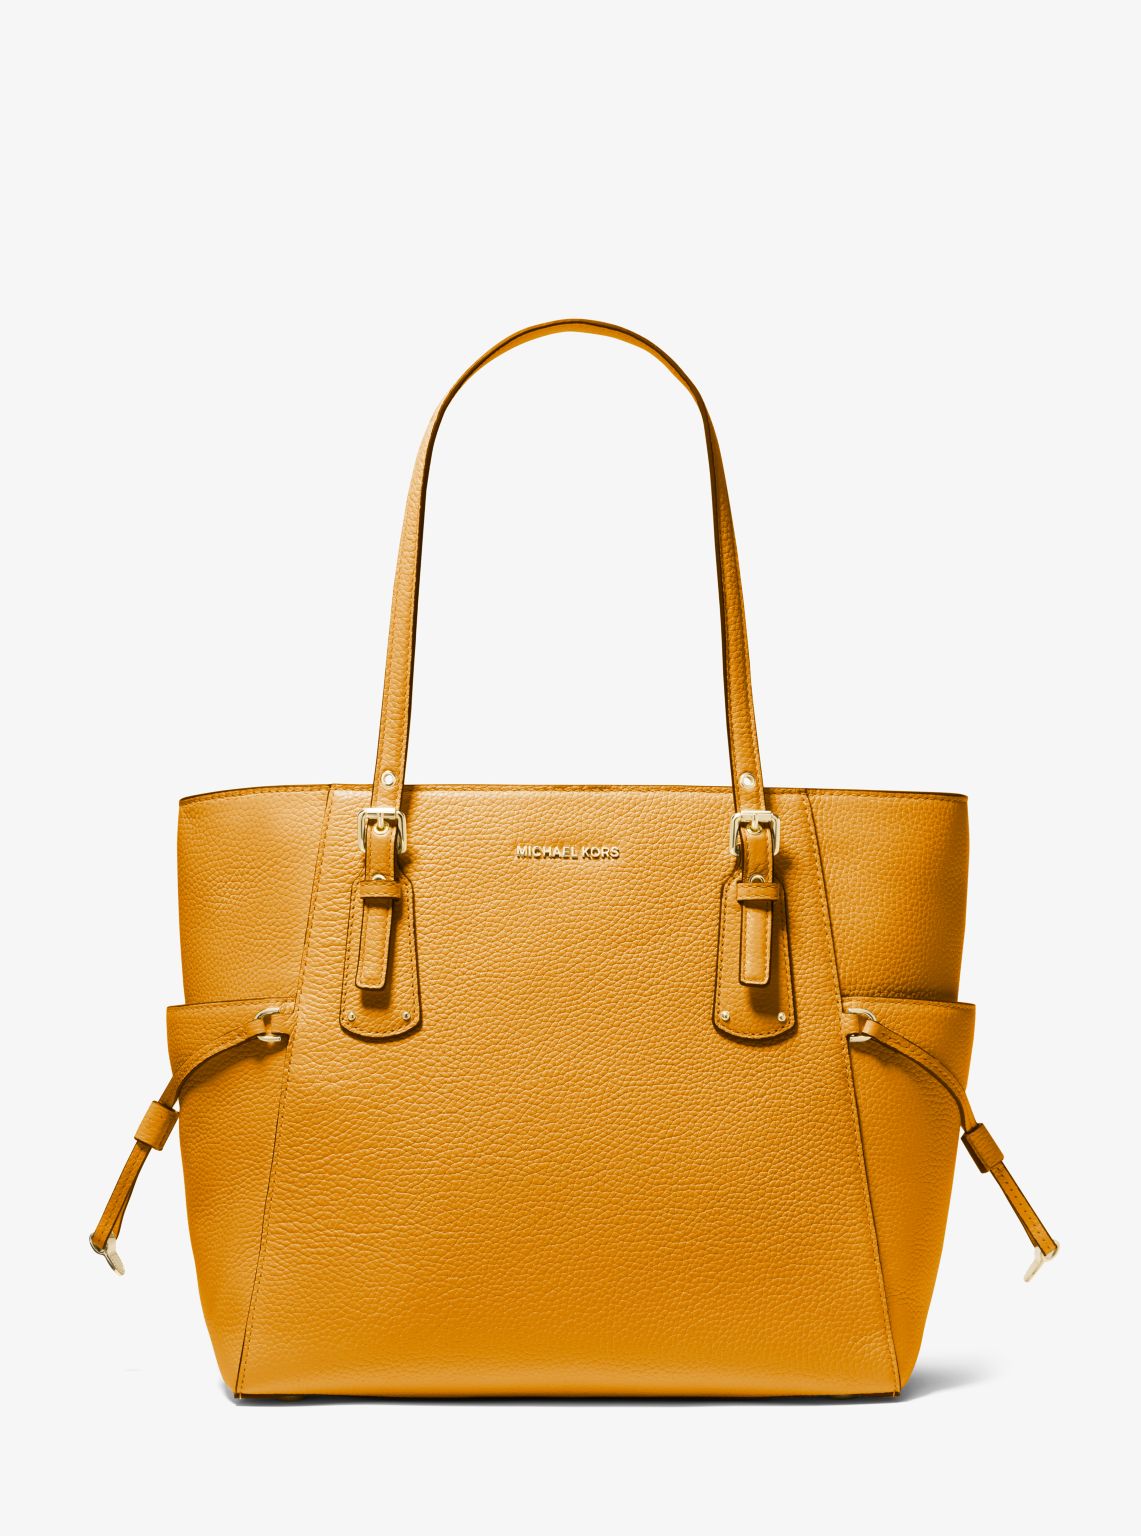 Michael Kors Voyager Leather Tote Bag